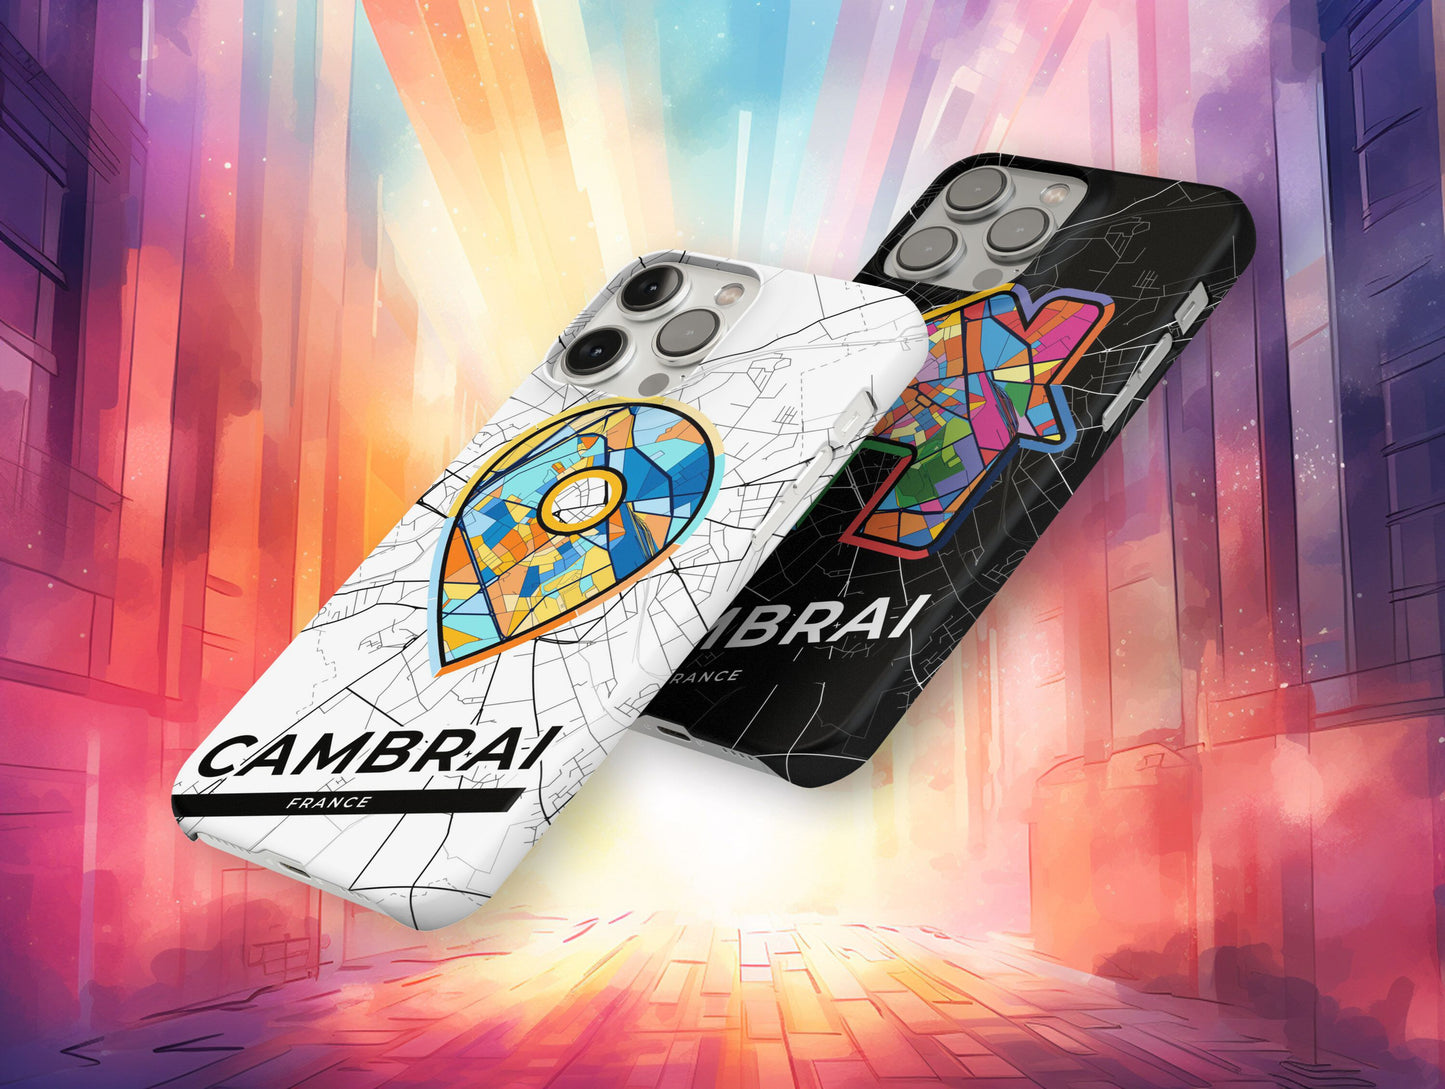 Cambrai France slim phone case with colorful icon. Birthday, wedding or housewarming gift. Couple match cases.